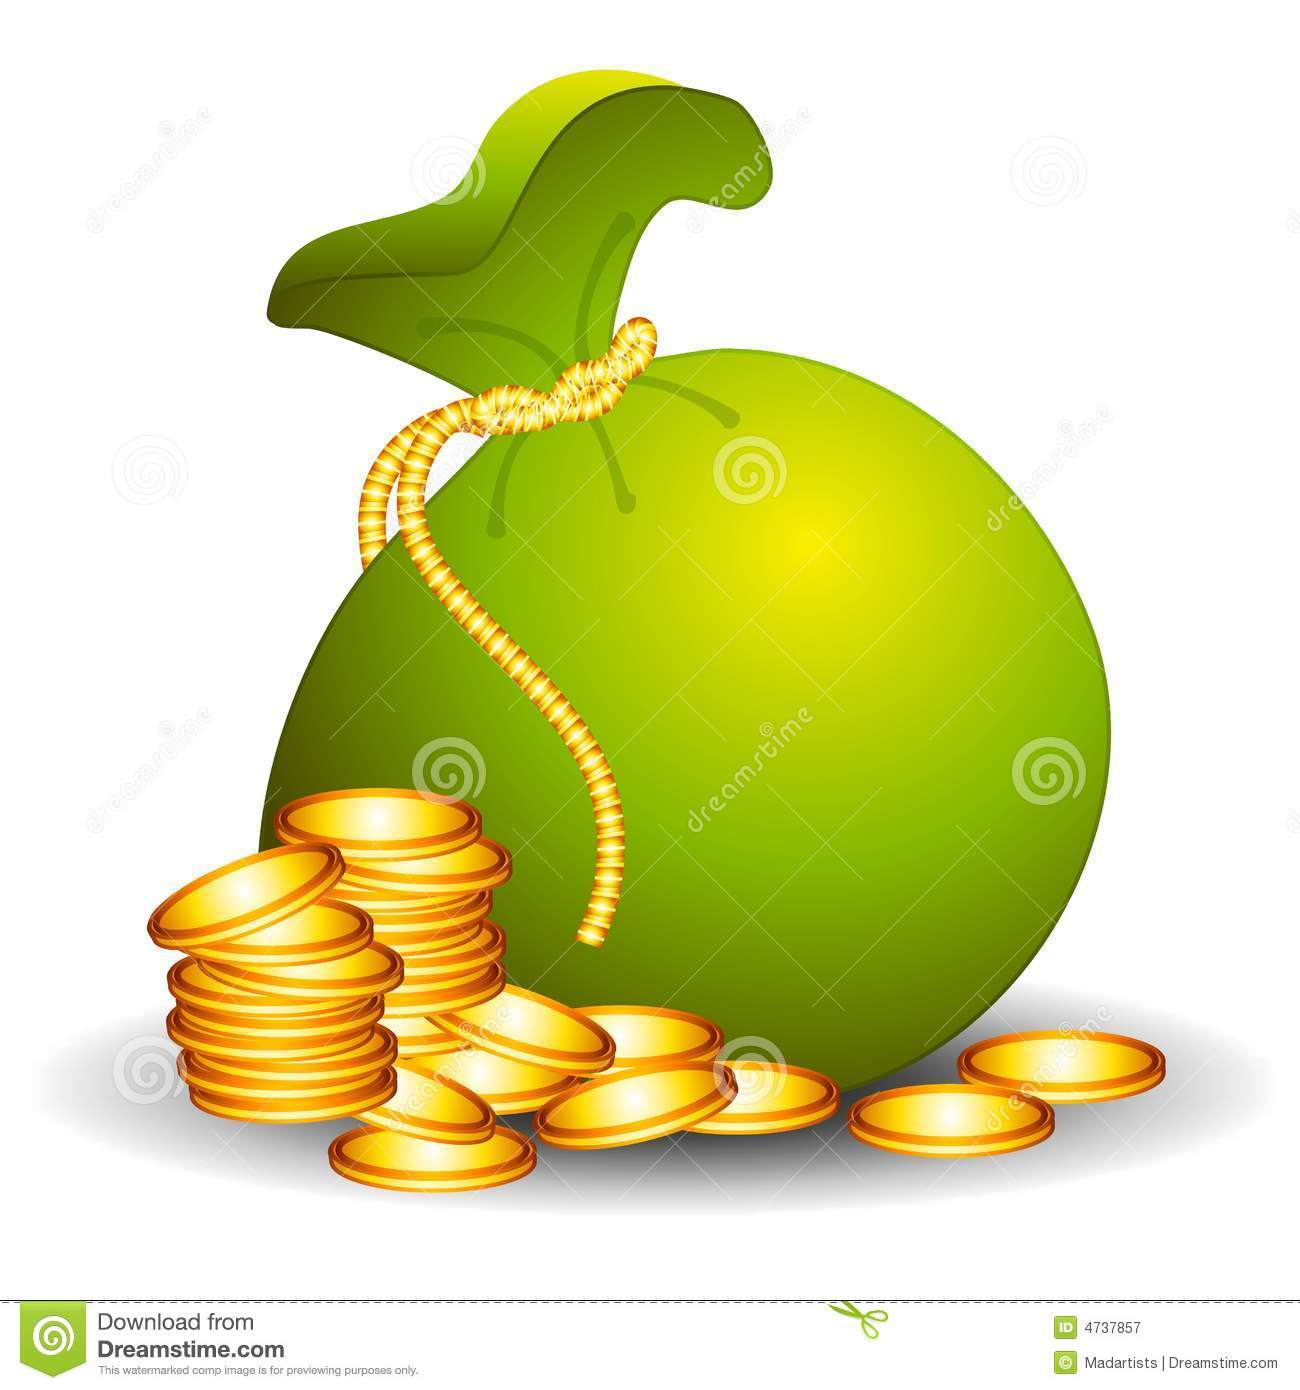 Large Bag Of Money With Coins Royalty Free Stock Photography   Image